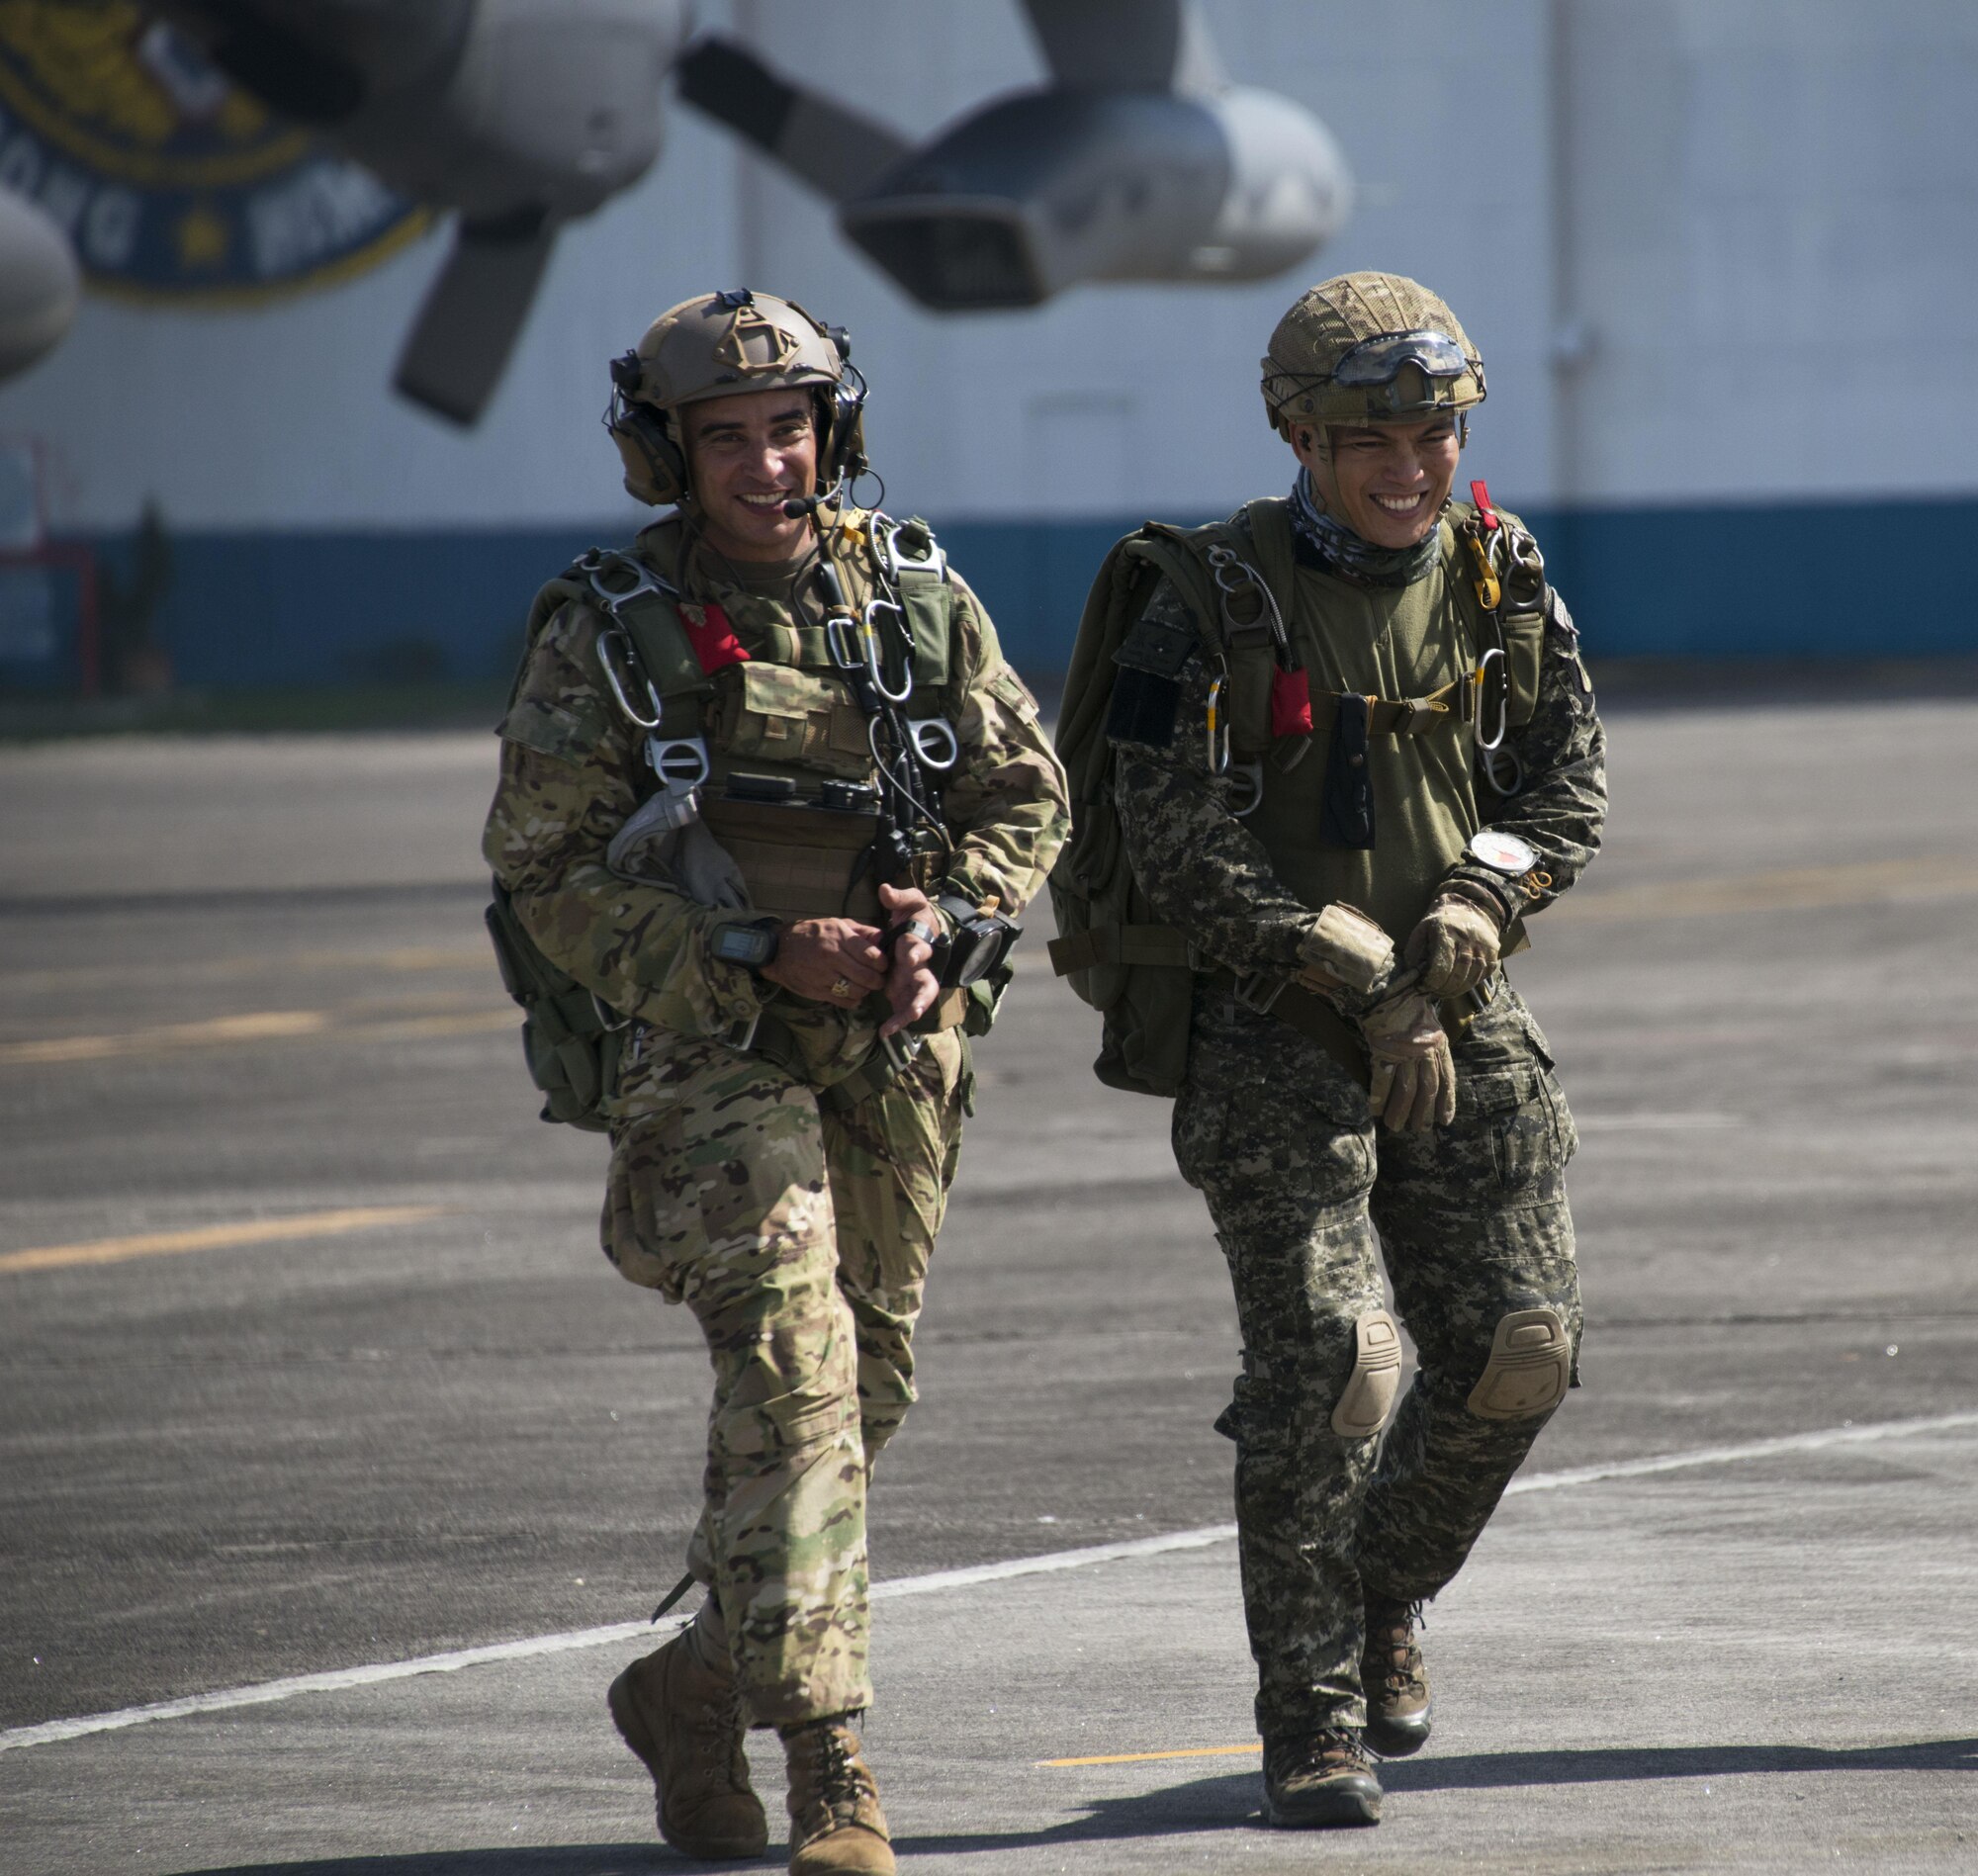 A member from Operational Detachment Alpha (ODA) 1324 and Philippine Army Light Reaction Regiment (LRR) walk the flightline in preparation for high-altitude, low-opening (HALO) airdrops from a MC-130H Combat Talon II at Clark Air Base, Sept. 24. The Armed Forces Philippine (AFP) typically jump from Philippine Air Force rotary wing assets, so jumping from a MC-130H provided a unique experience for the LLR. (U.S. Air Force photo by Capt. Jessica Tait)